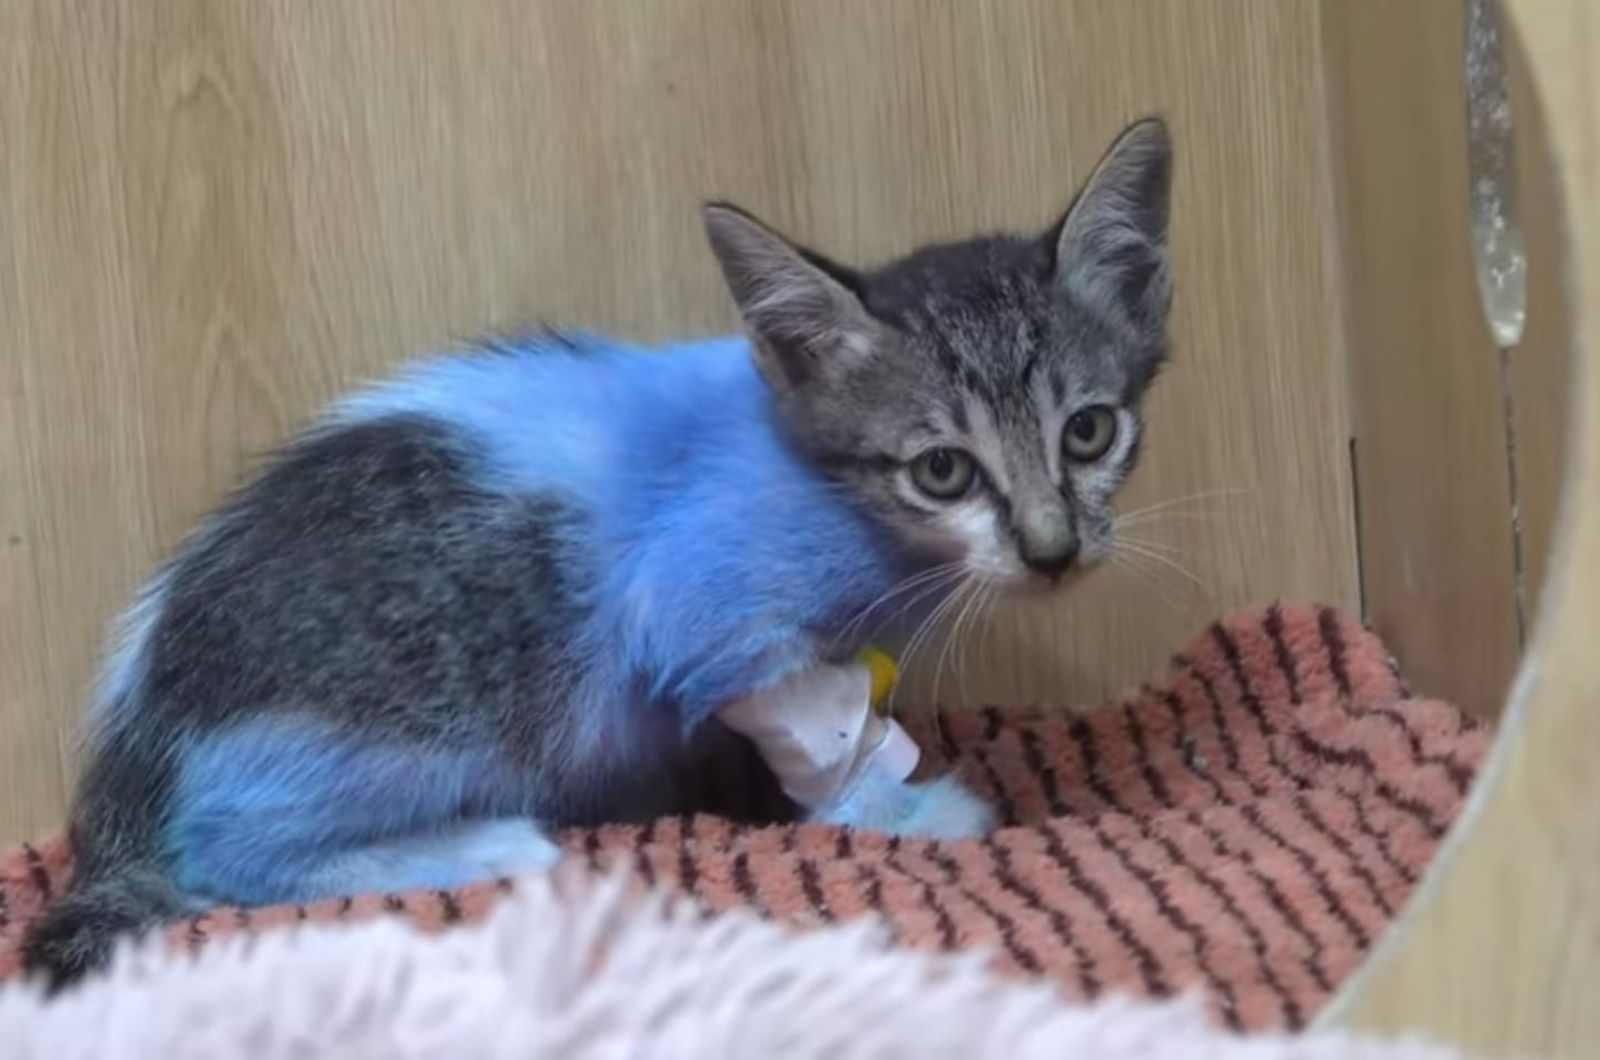 rescued kitten with blue fur